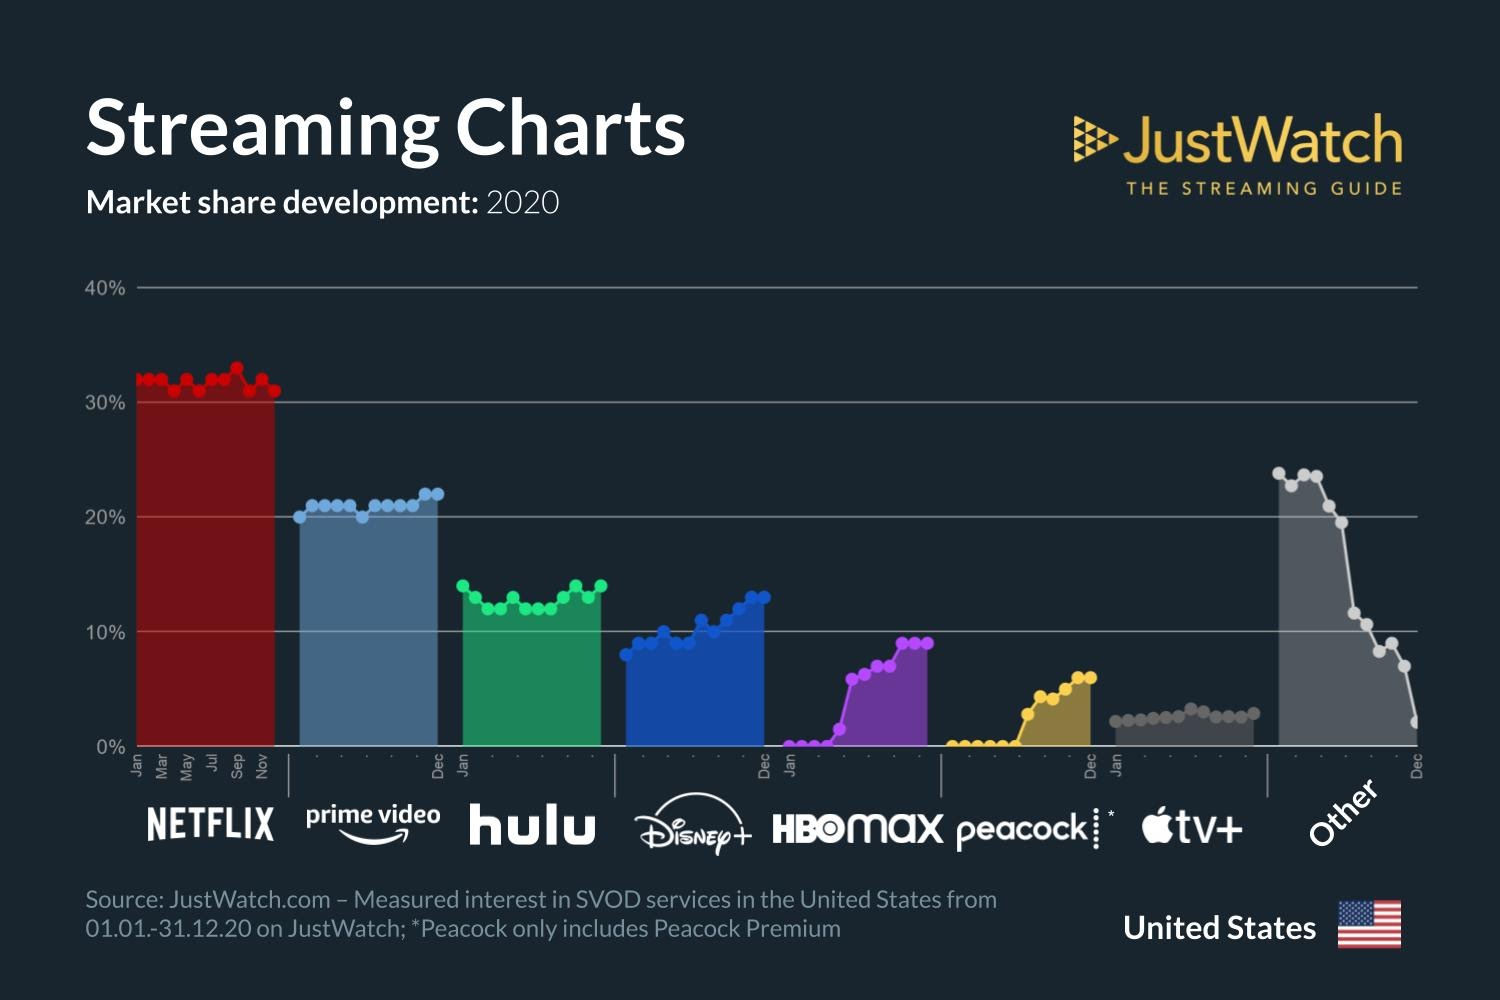 Here's how the big streaming services stacked up against each other in 2020